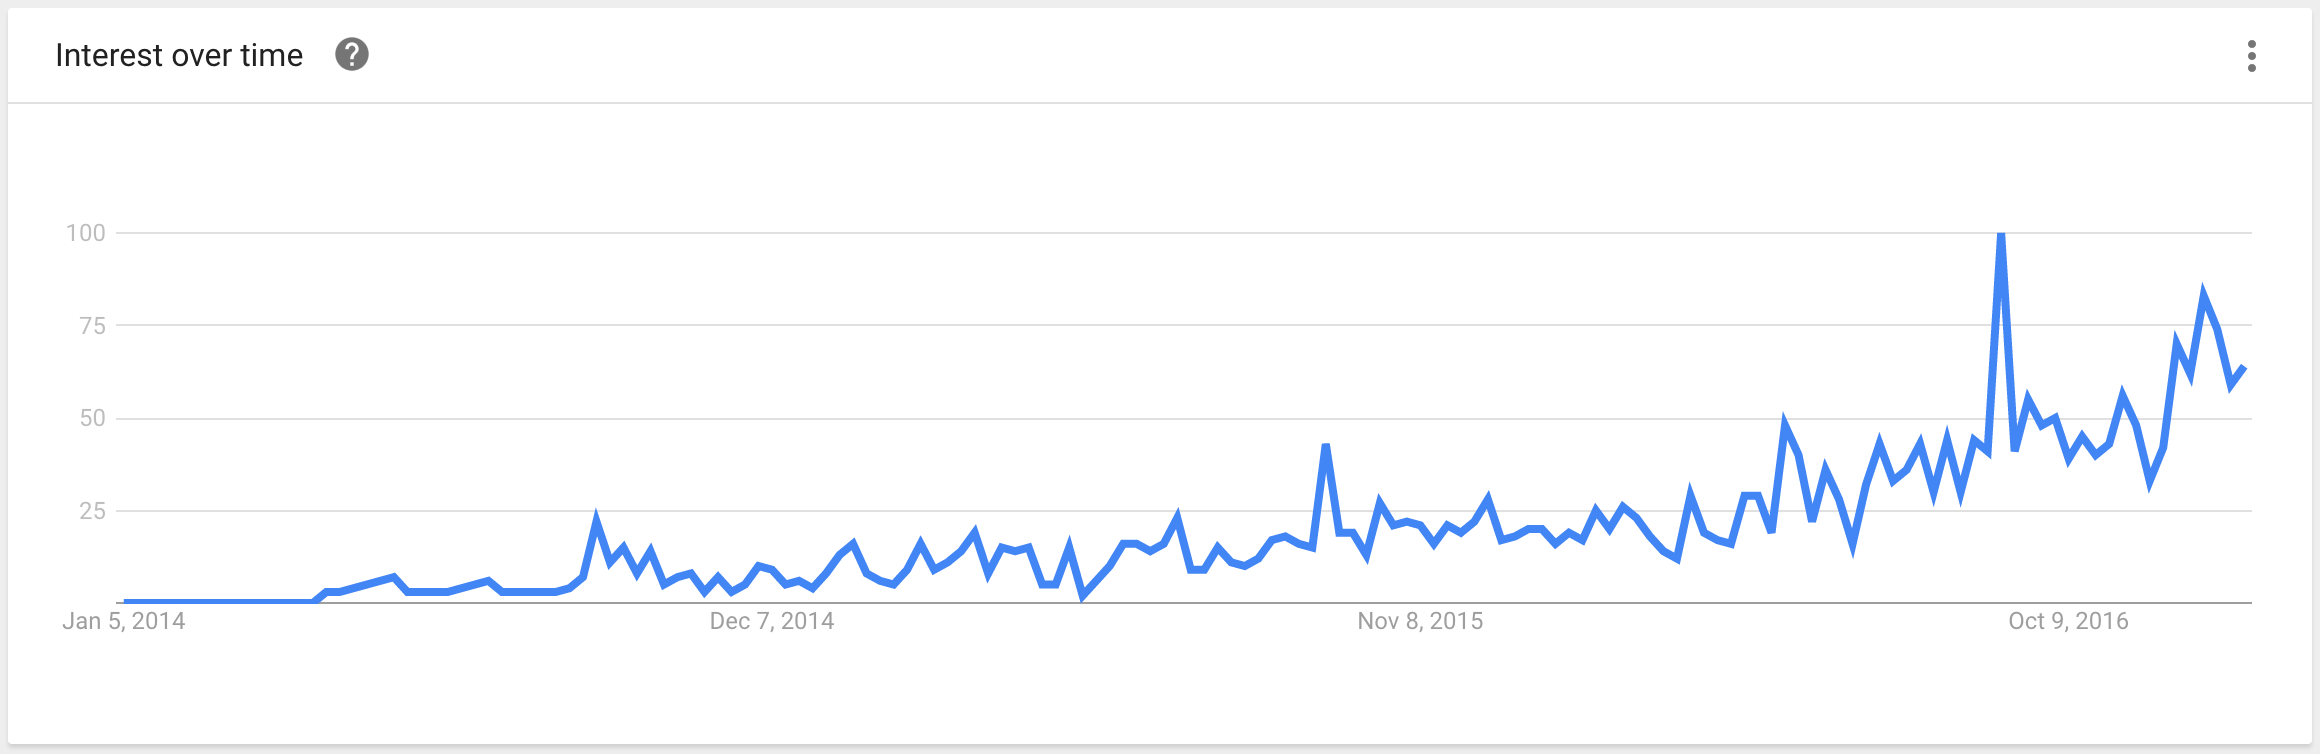 Google trends for "sapiens harari" from January 1, 2014